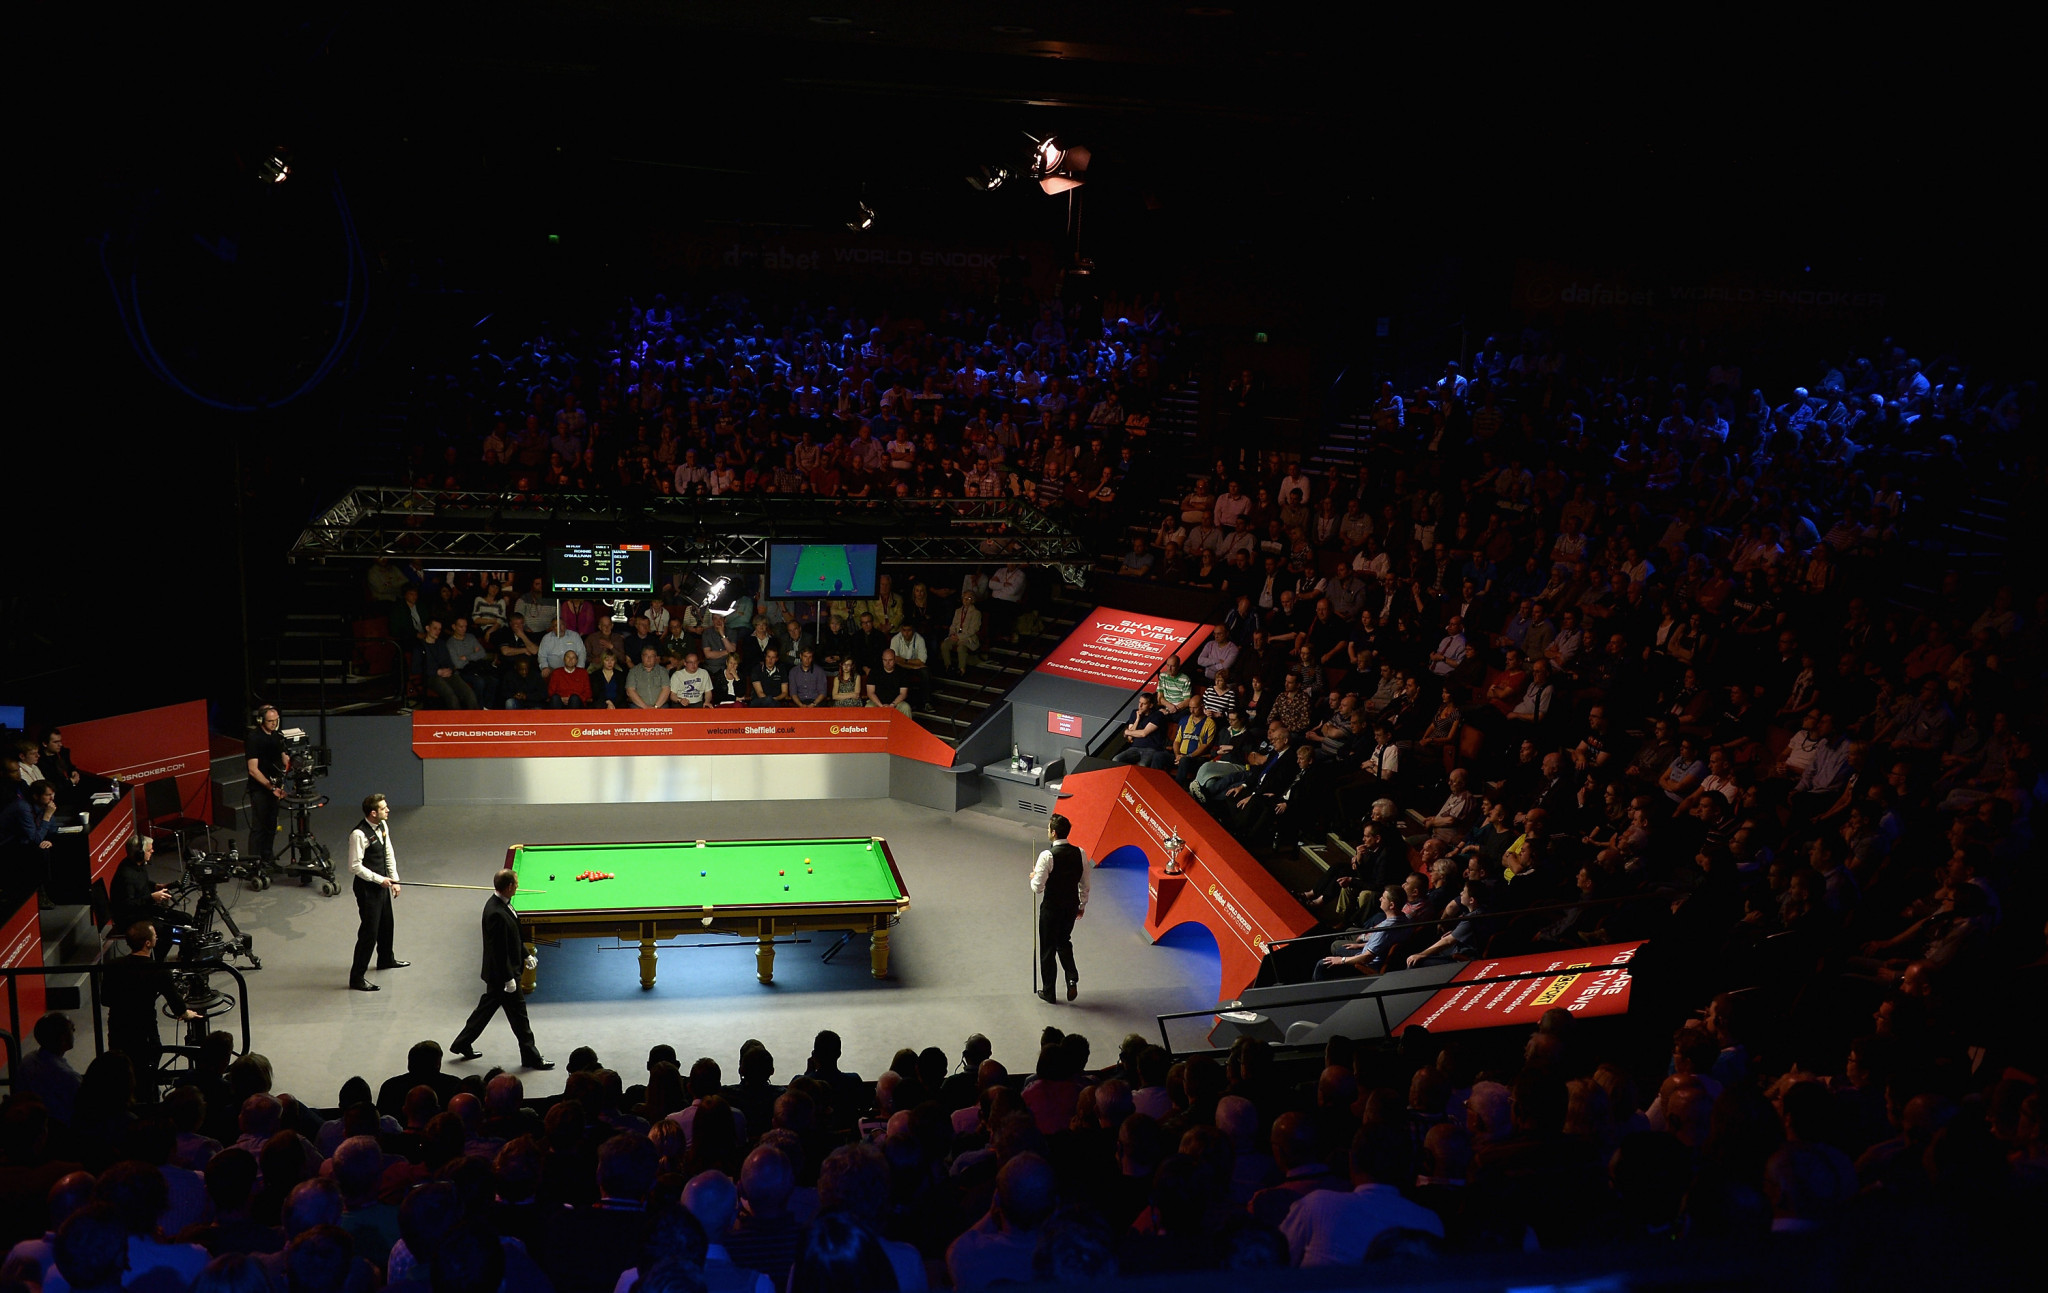 The Crucible will again host the World Championship this year, but later than scheduled ©Getty Images